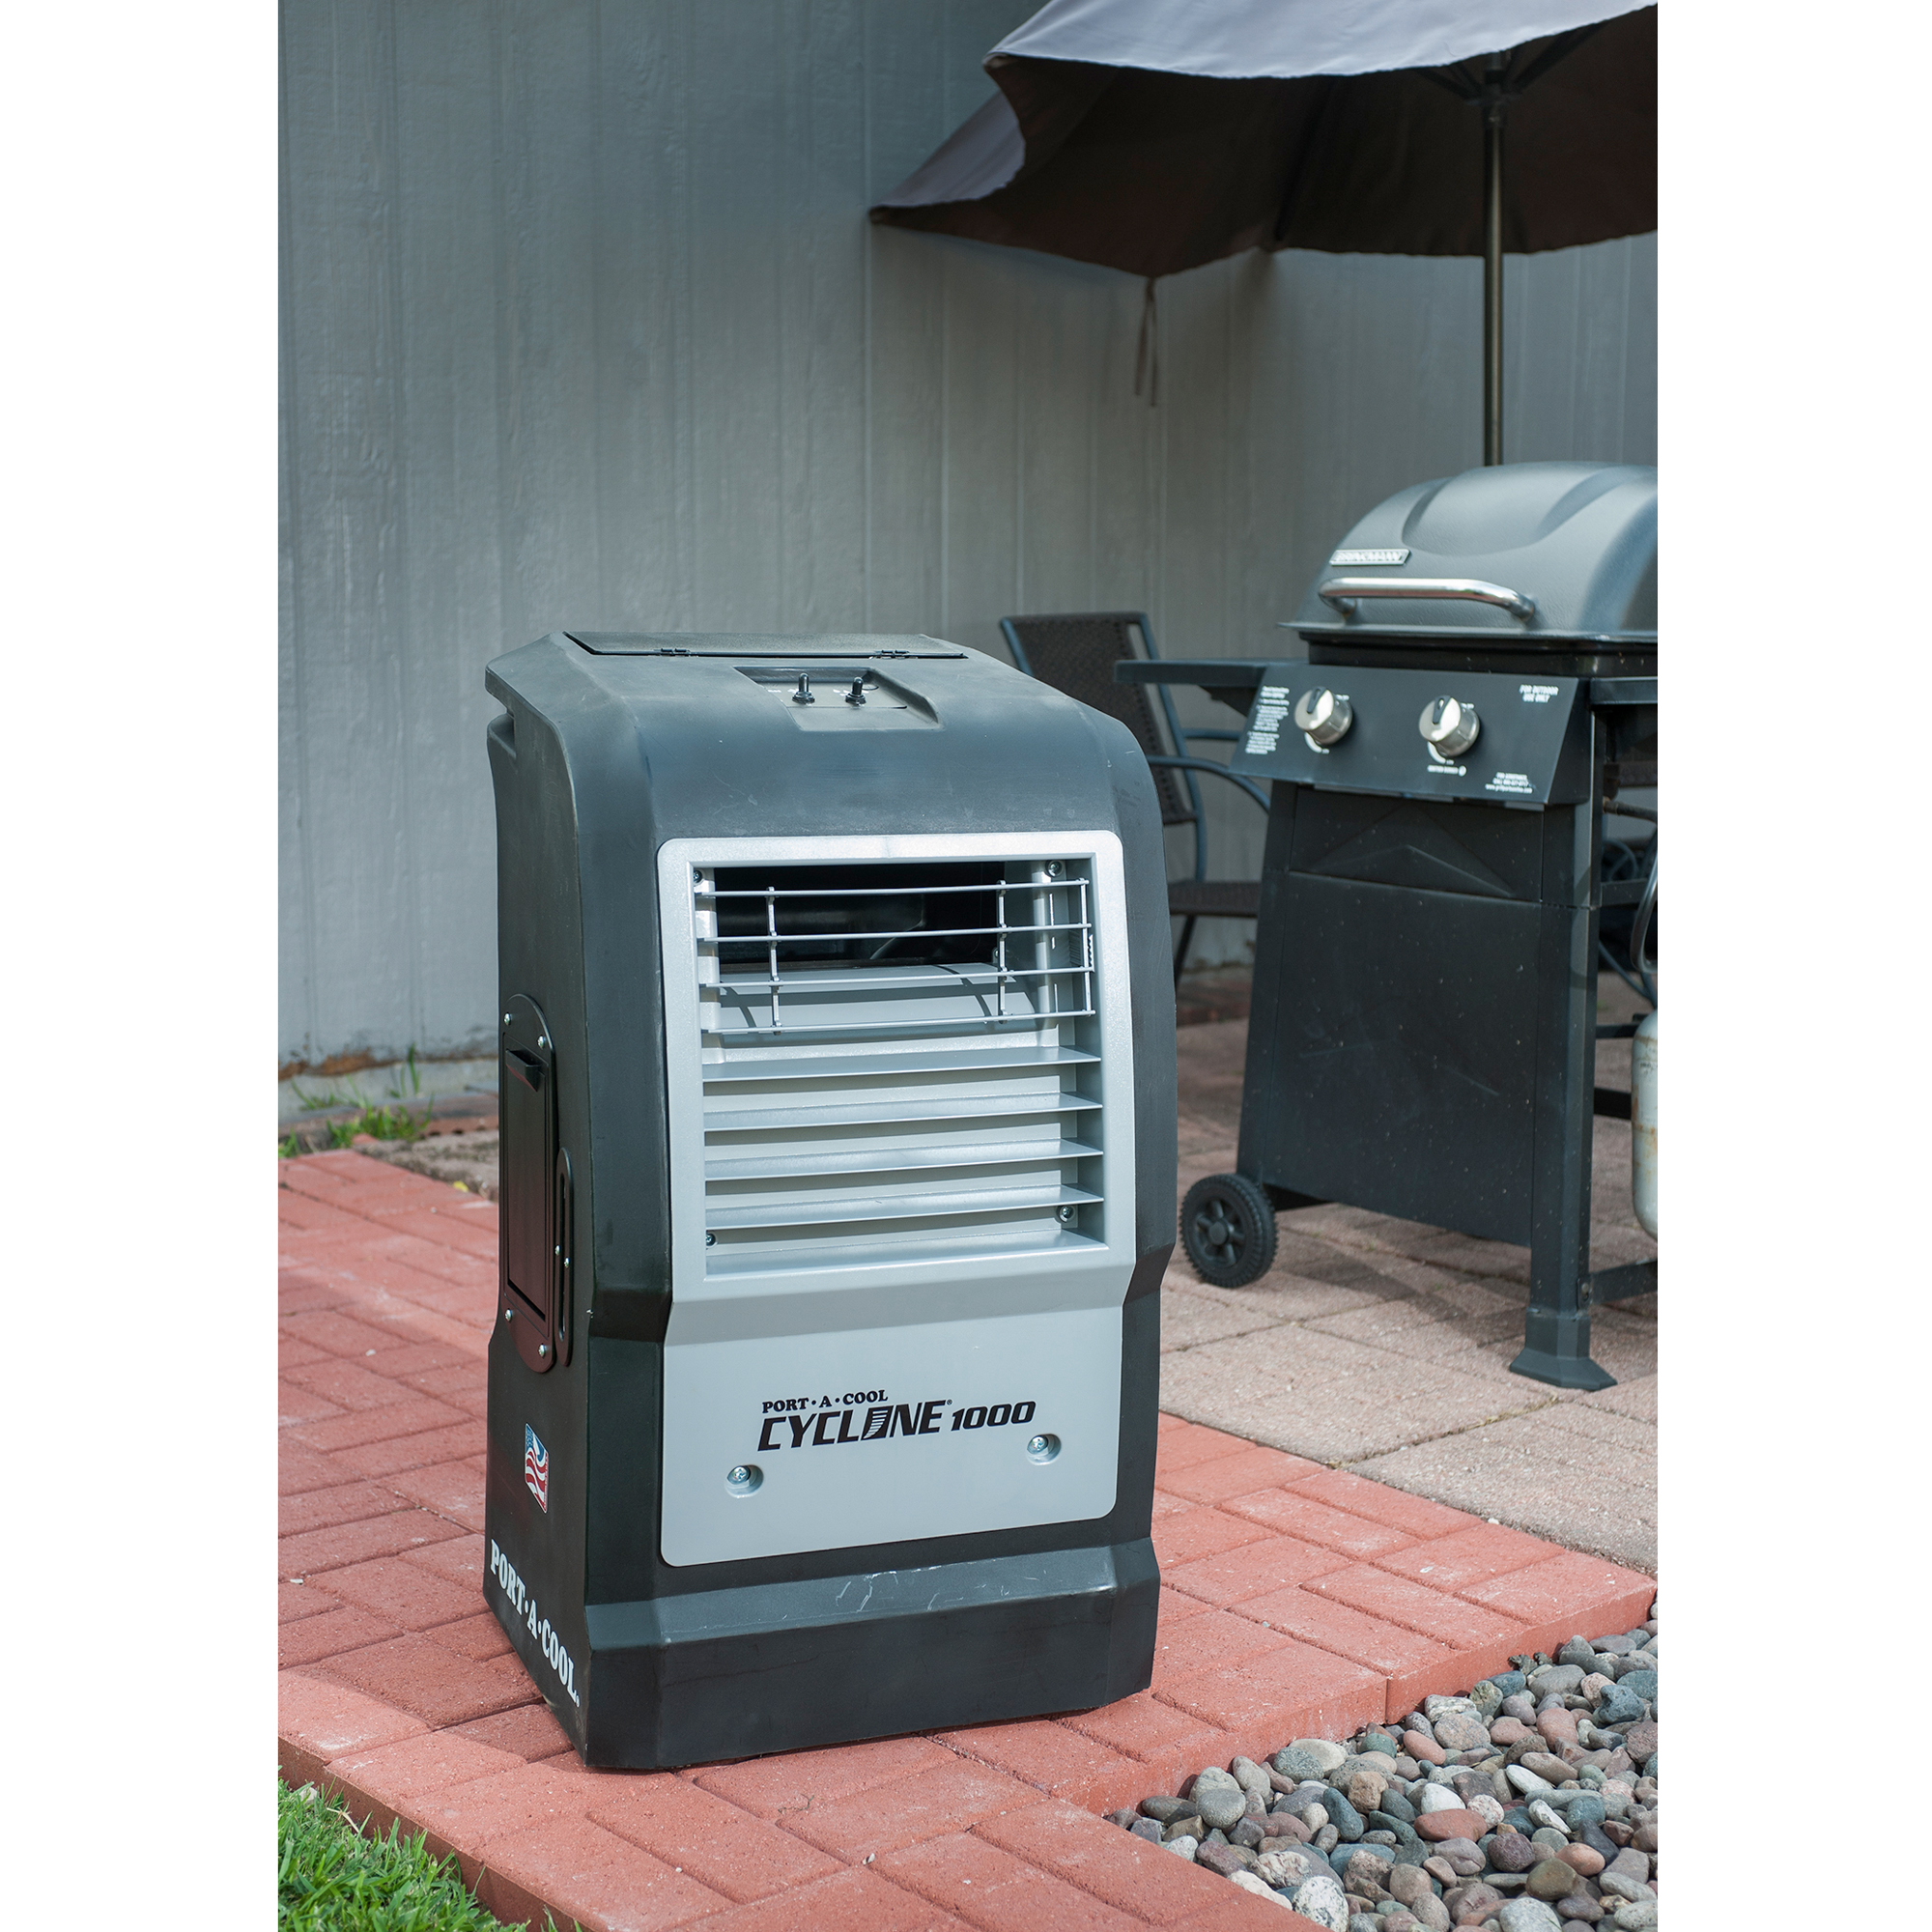 Port-A-Cool Cyclone 1000 Portable Evaporative Cooling Unit, Black - image 3 of 8